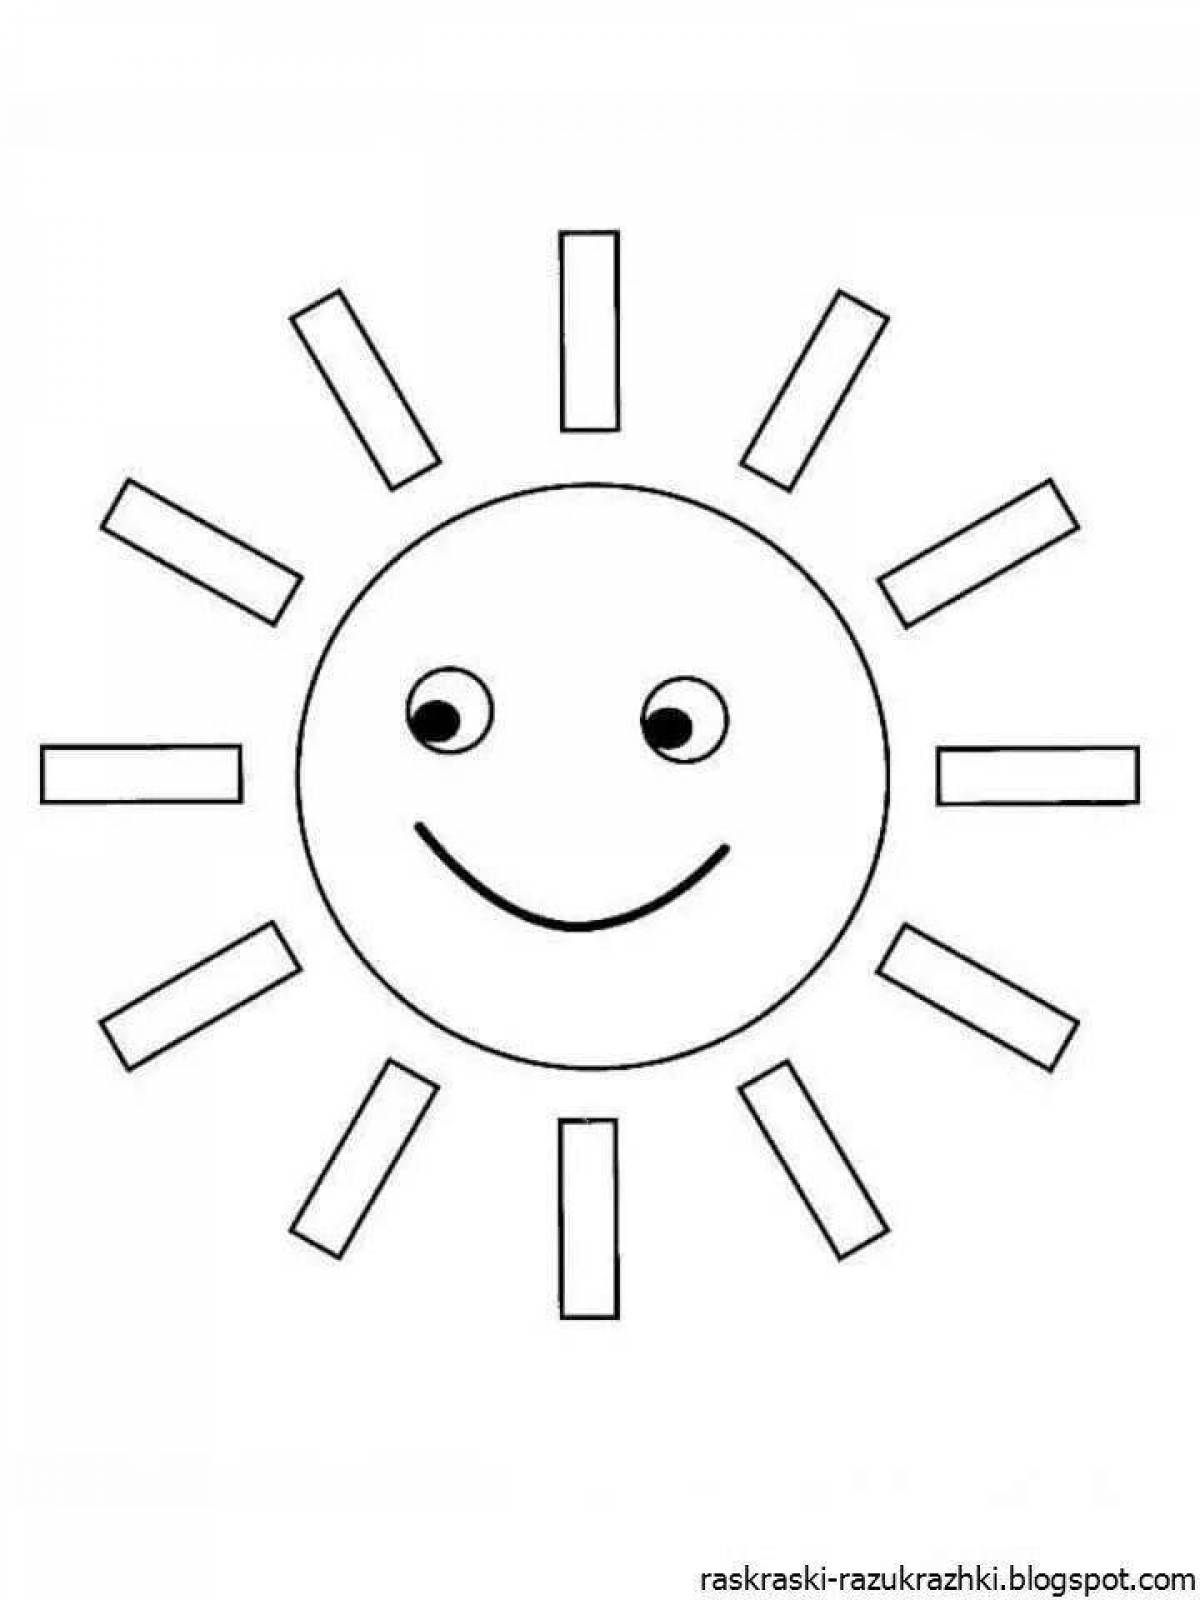 Sun picture for kids #2